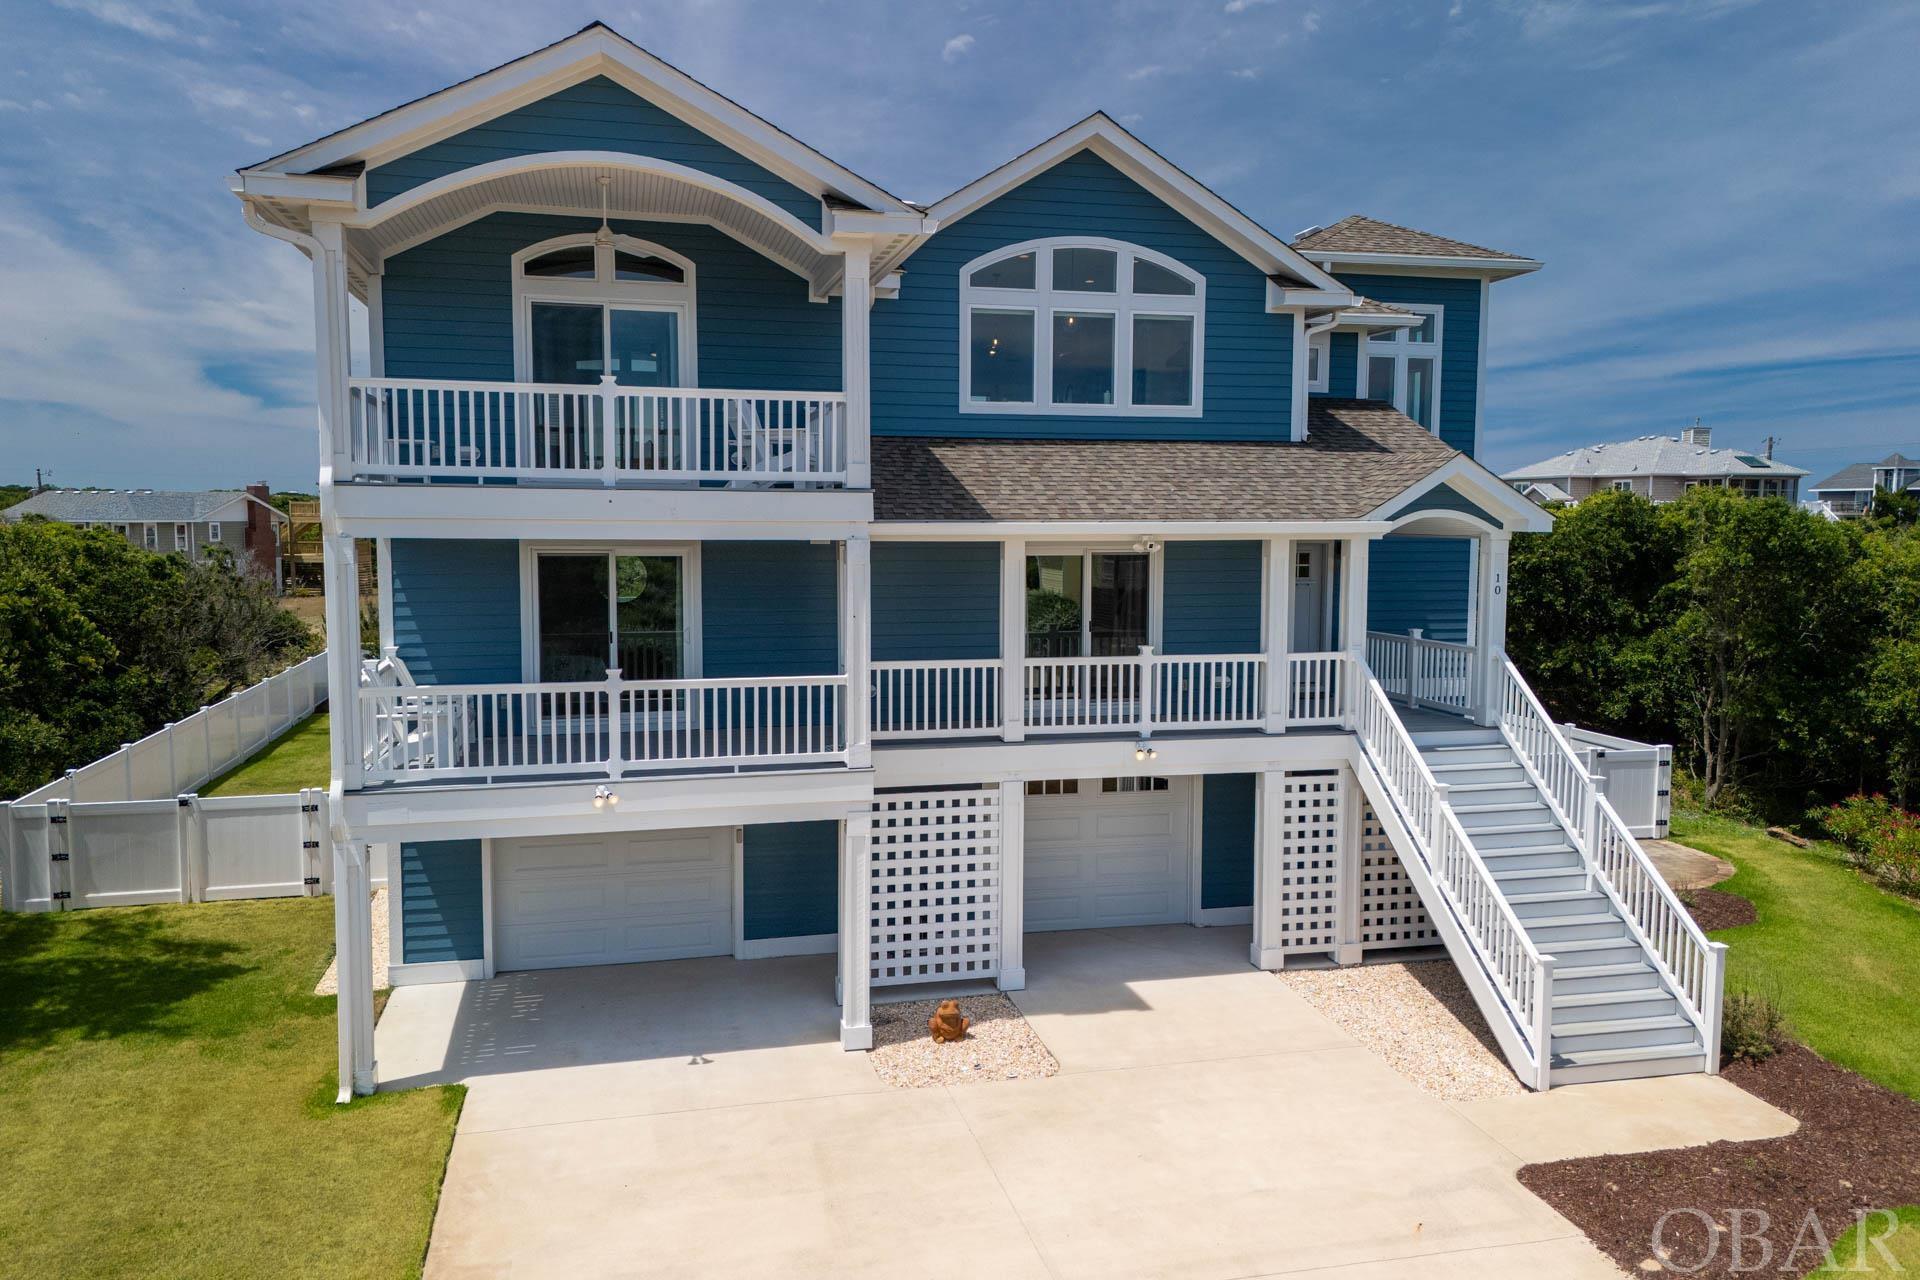 10 Seventh Avenue, Southern Shores, NC 27949, 4 Bedrooms Bedrooms, ,4 BathroomsBathrooms,Residential,For sale,Seventh Avenue,126166